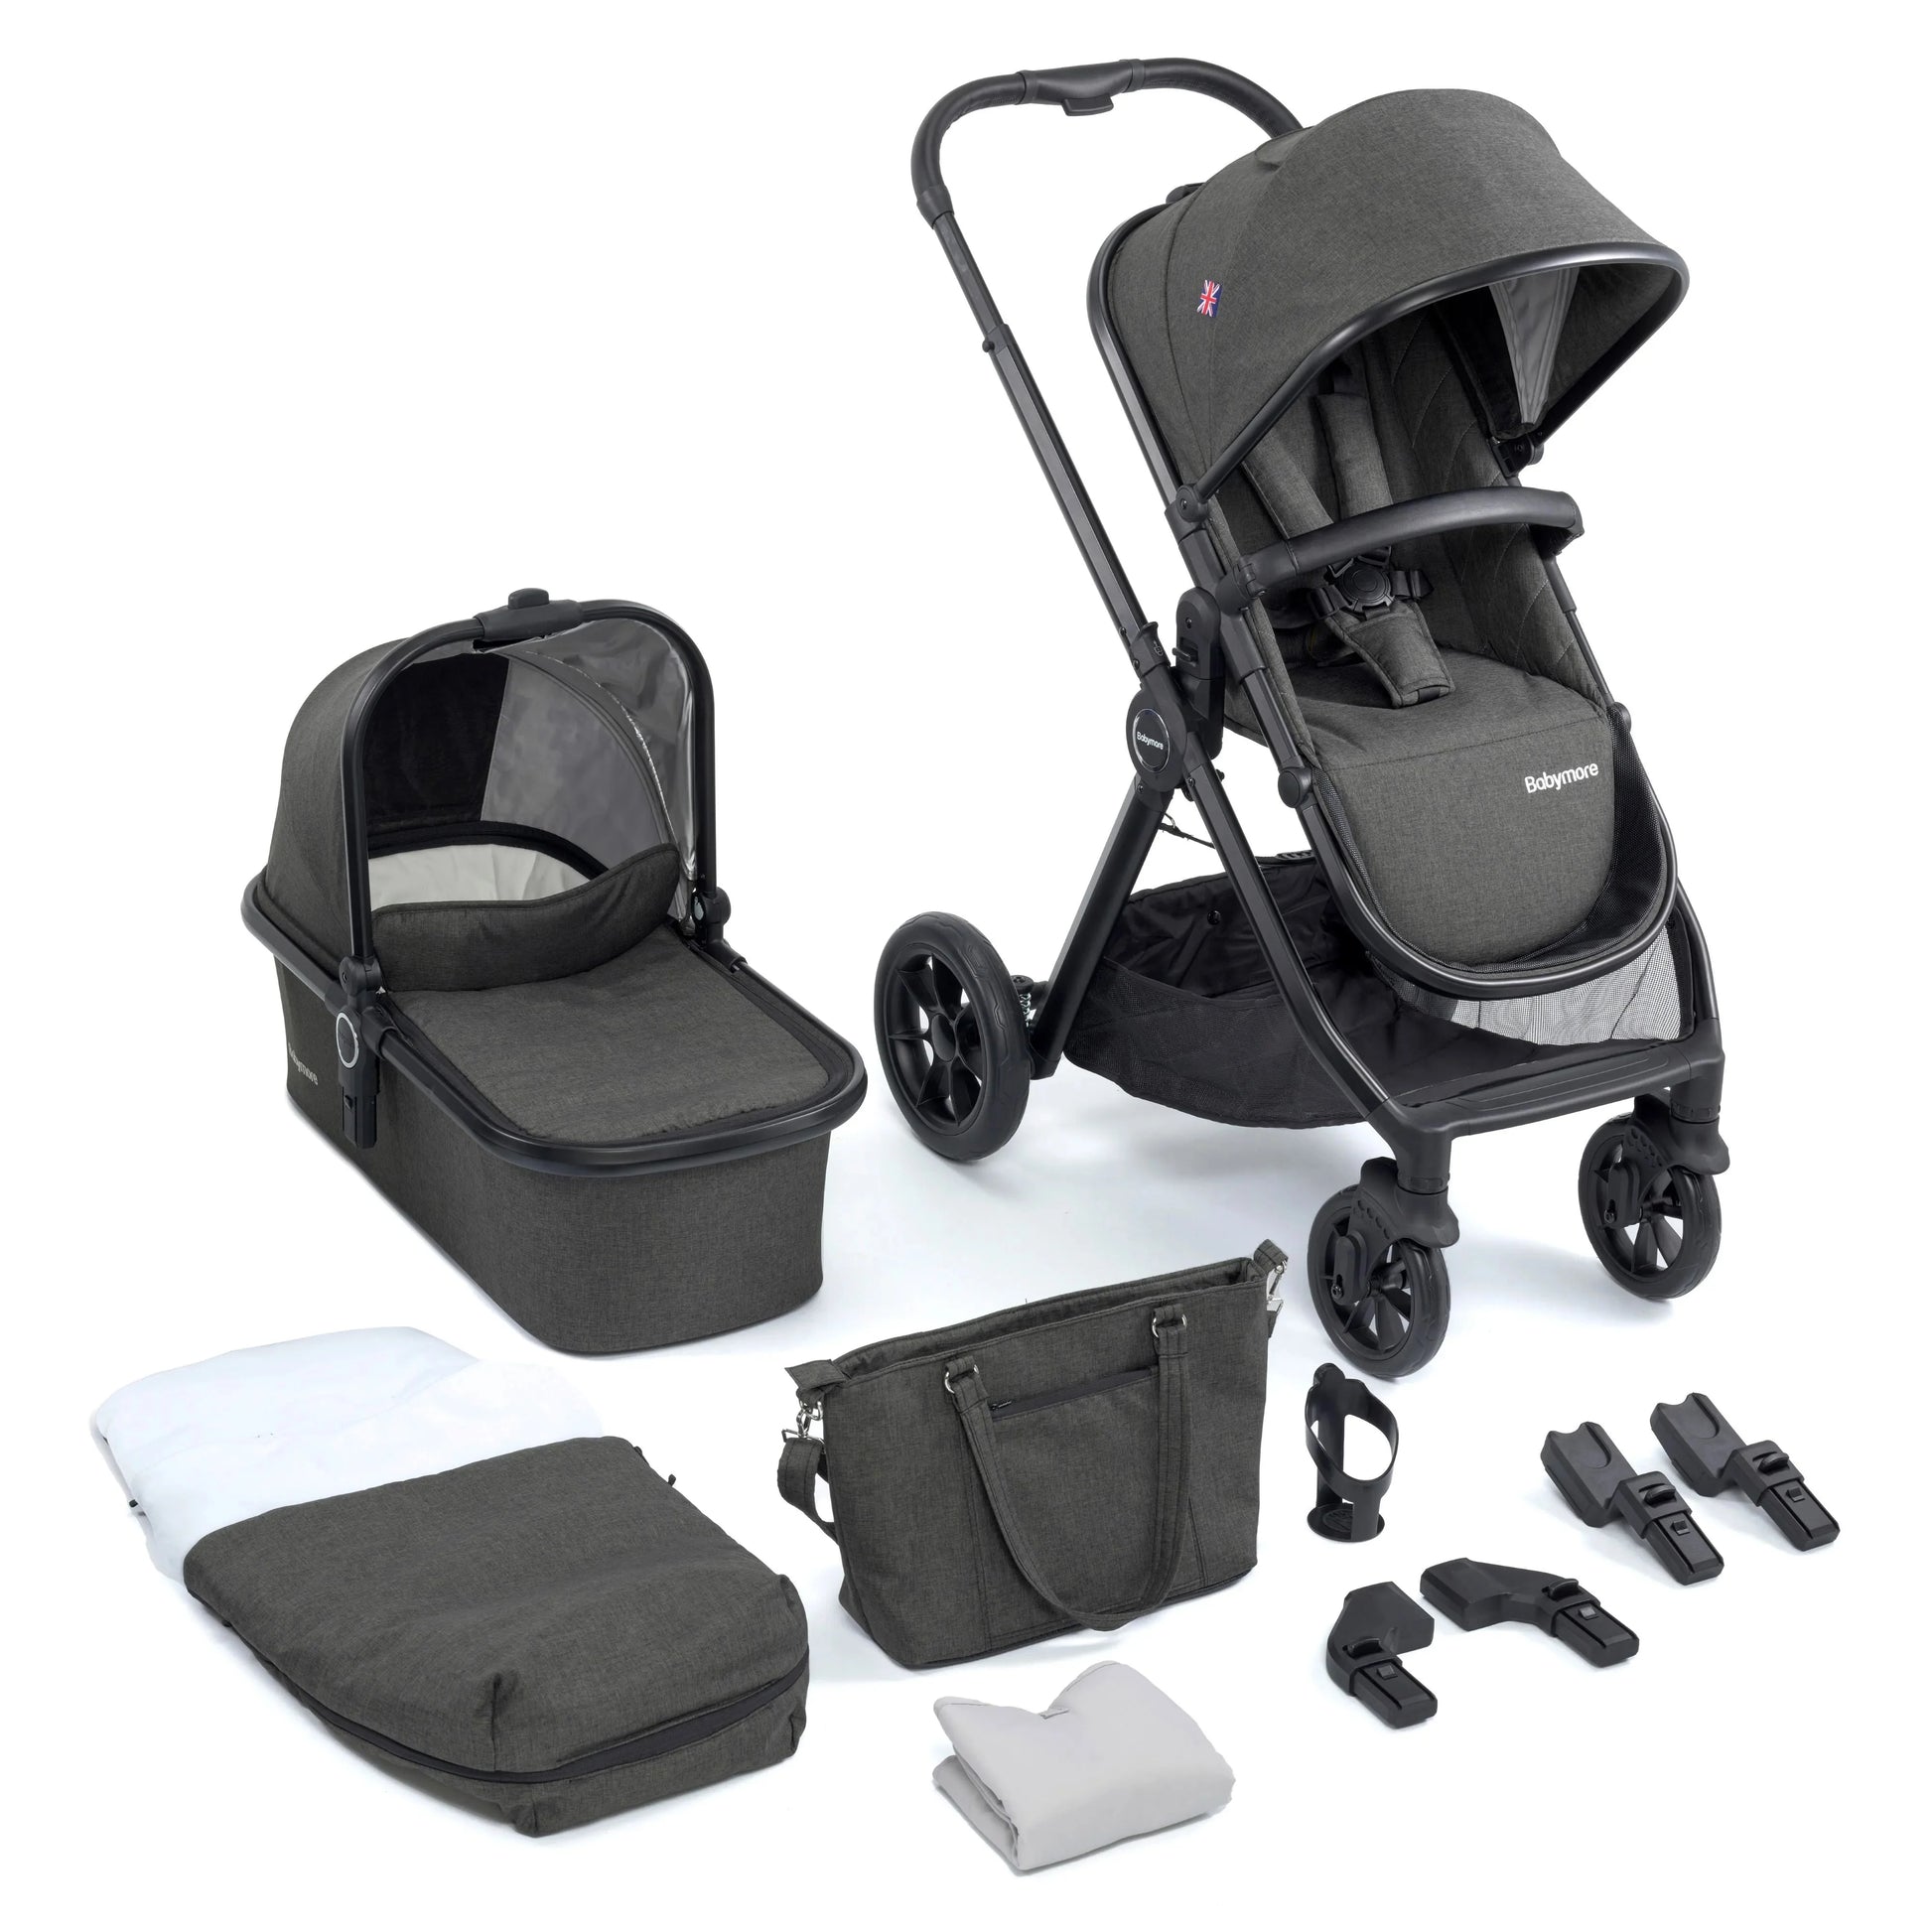 Babymore Memore V2 Travel System 13 Piece with Pecan i-Size Car Seat and Isofix Base - Black BabyJoy